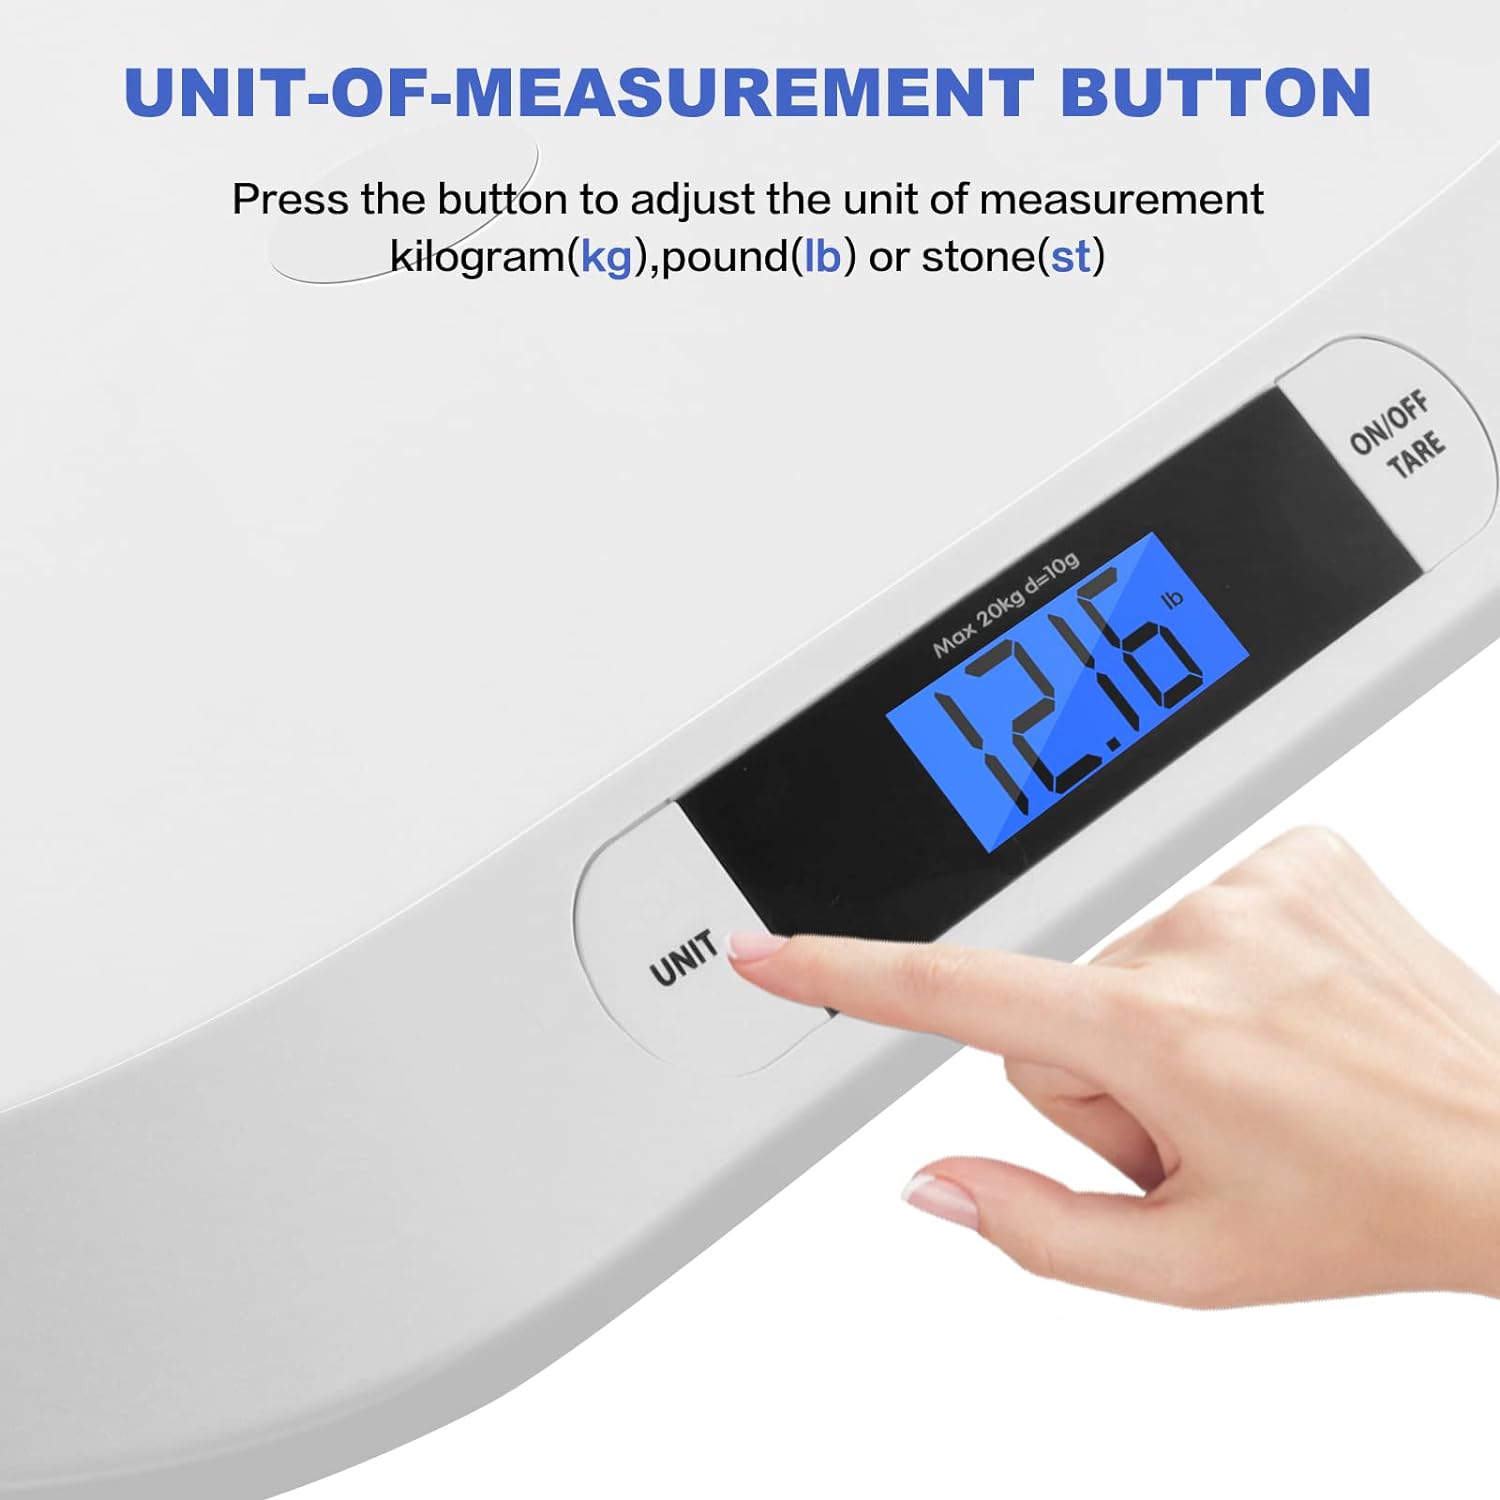 Digital Baby Scale, Infant Scale for Weighing in Pounds, Ounces, or Kilograms up to 44 lbs, Newborn Baby Scale with Hold Function, Pet Scale for Cats and Dogs : Baby